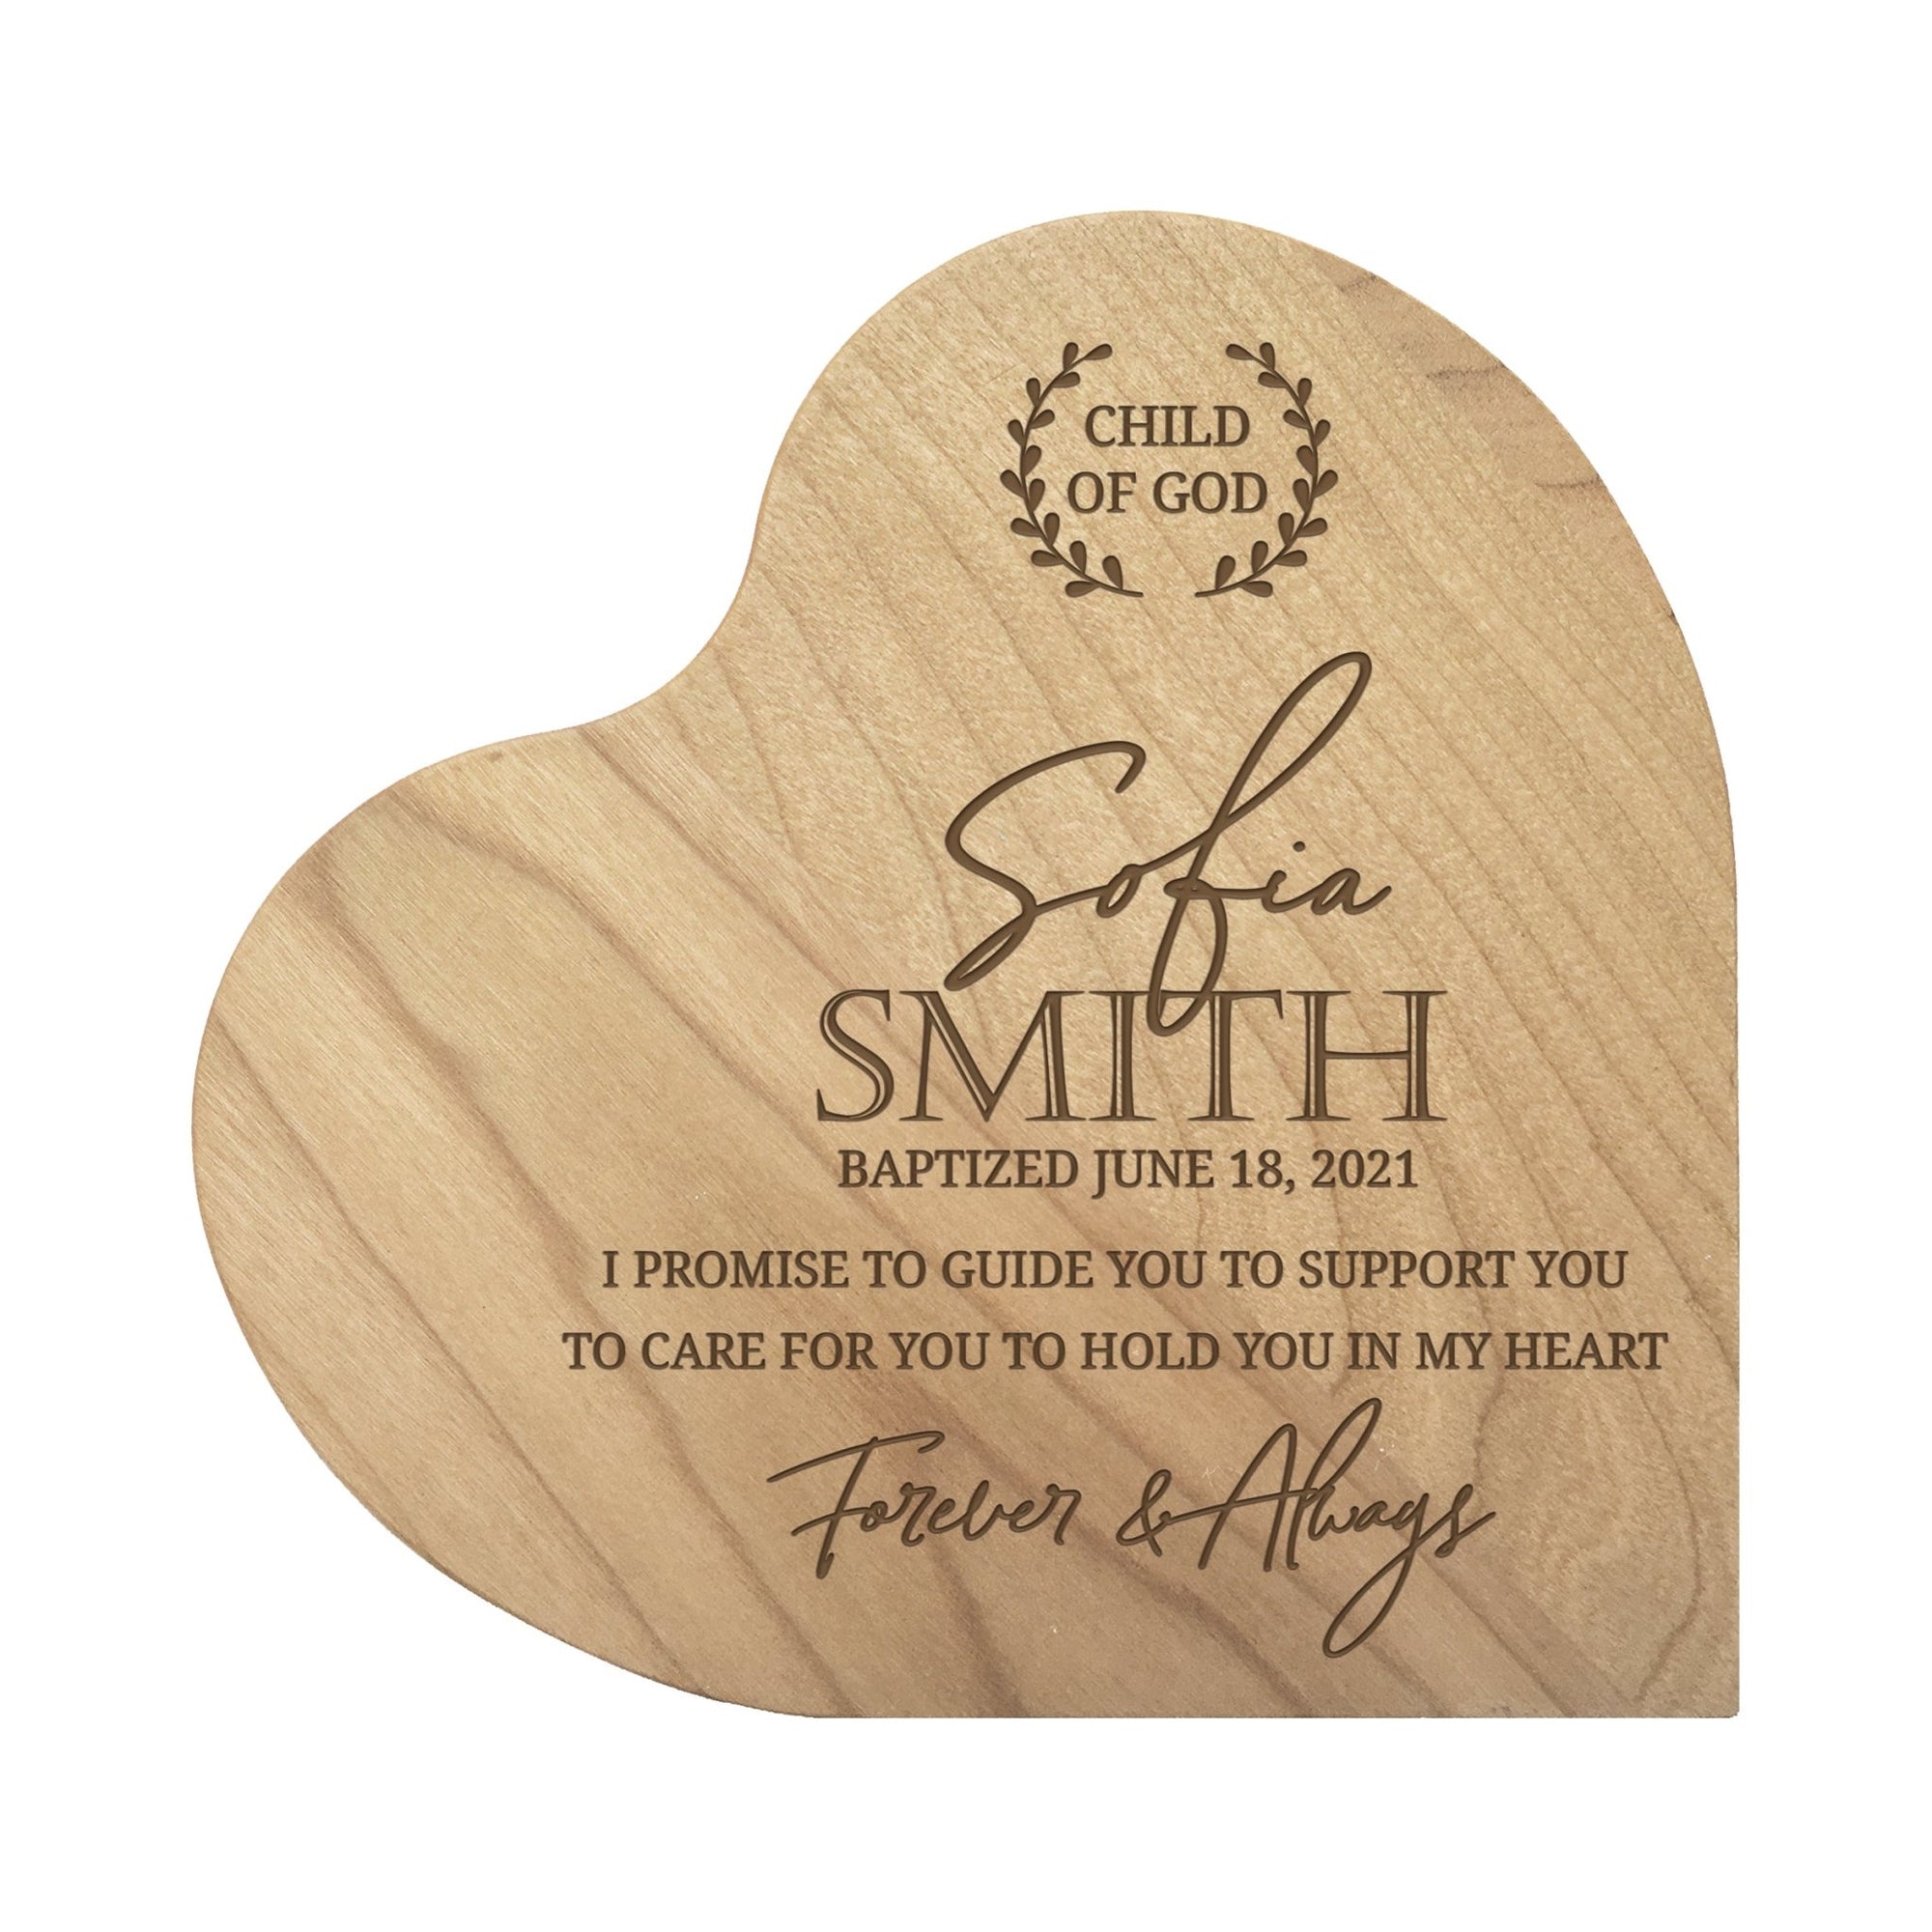 Personalized Baptism Solid Wood Heart Decoration With Inspirational Verse Keepsake Gift 5x5.25 - I Promise To Guide - LifeSong Milestones